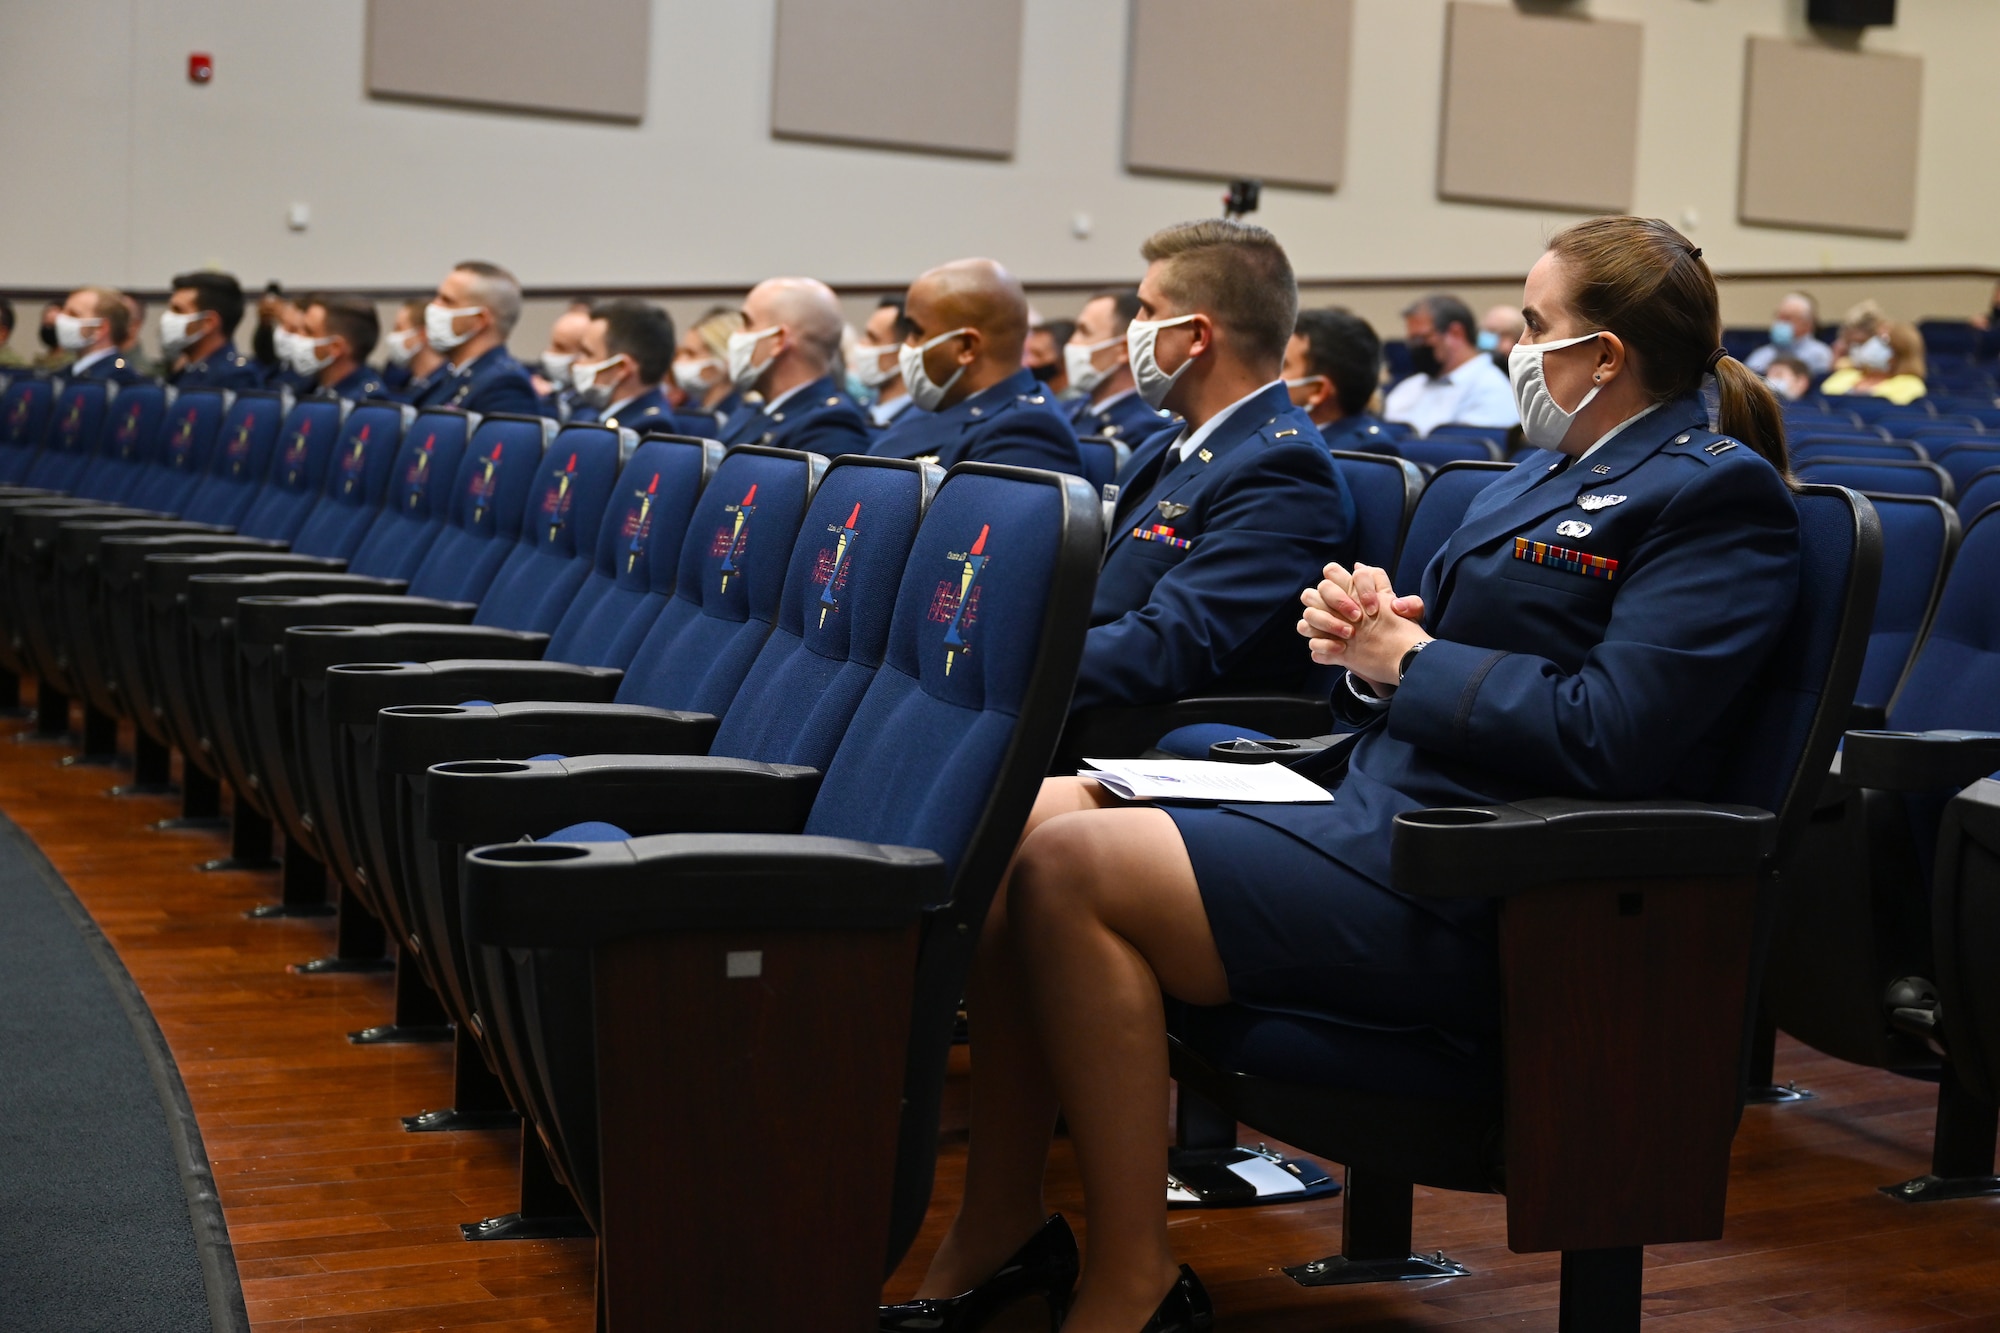 Graduates from Specialized Undergraduate Pilot Training Class 21-09 sit in the Kaye Auditorium during their graduation ceremony, May 7, 2021, on Columbus Air Force Base, Miss. The distinguished graduates of Class 21-09 were 2nd Lt. Samuel Rexroad and 2nd Lt. William Talbott for outstanding performance in academics, officer qualities and flying abilities. (U.S. Air Force photo by Senior Airman Jake Jacobsen)